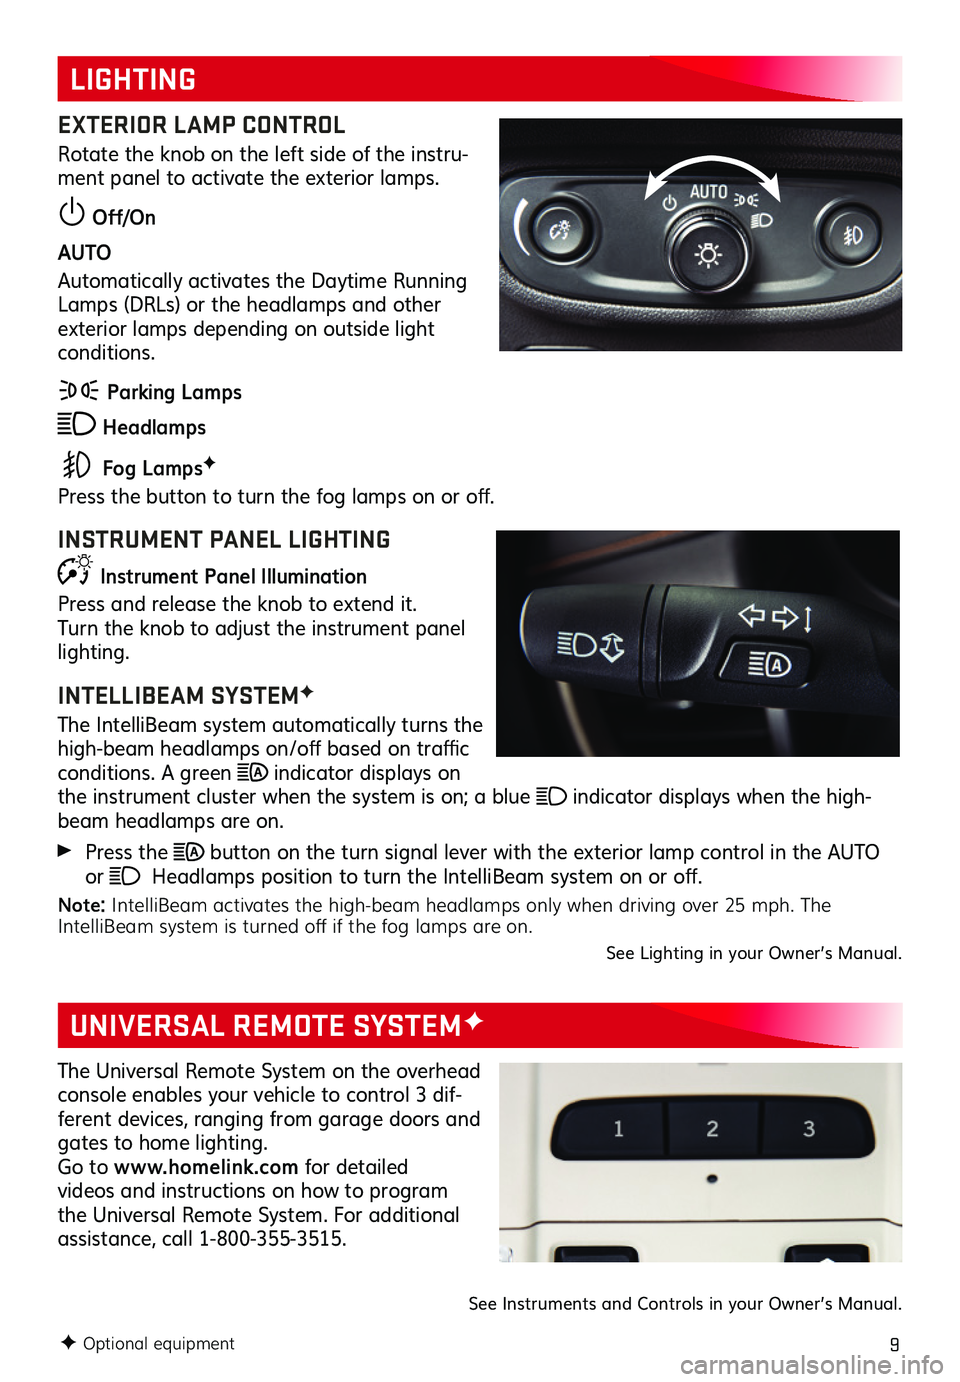 GMC TERRAIN 2019  Get To Know Guide 9
LIGHTING
UNIVERSAL REMOTE SYSTEMF
EXTERIOR LAMP CONTROL
Rotate the knob on the left side of the instru-ment panel to activate the exterior lamps .
 Off/On
AUTO 
Automatically activates the Daytime R